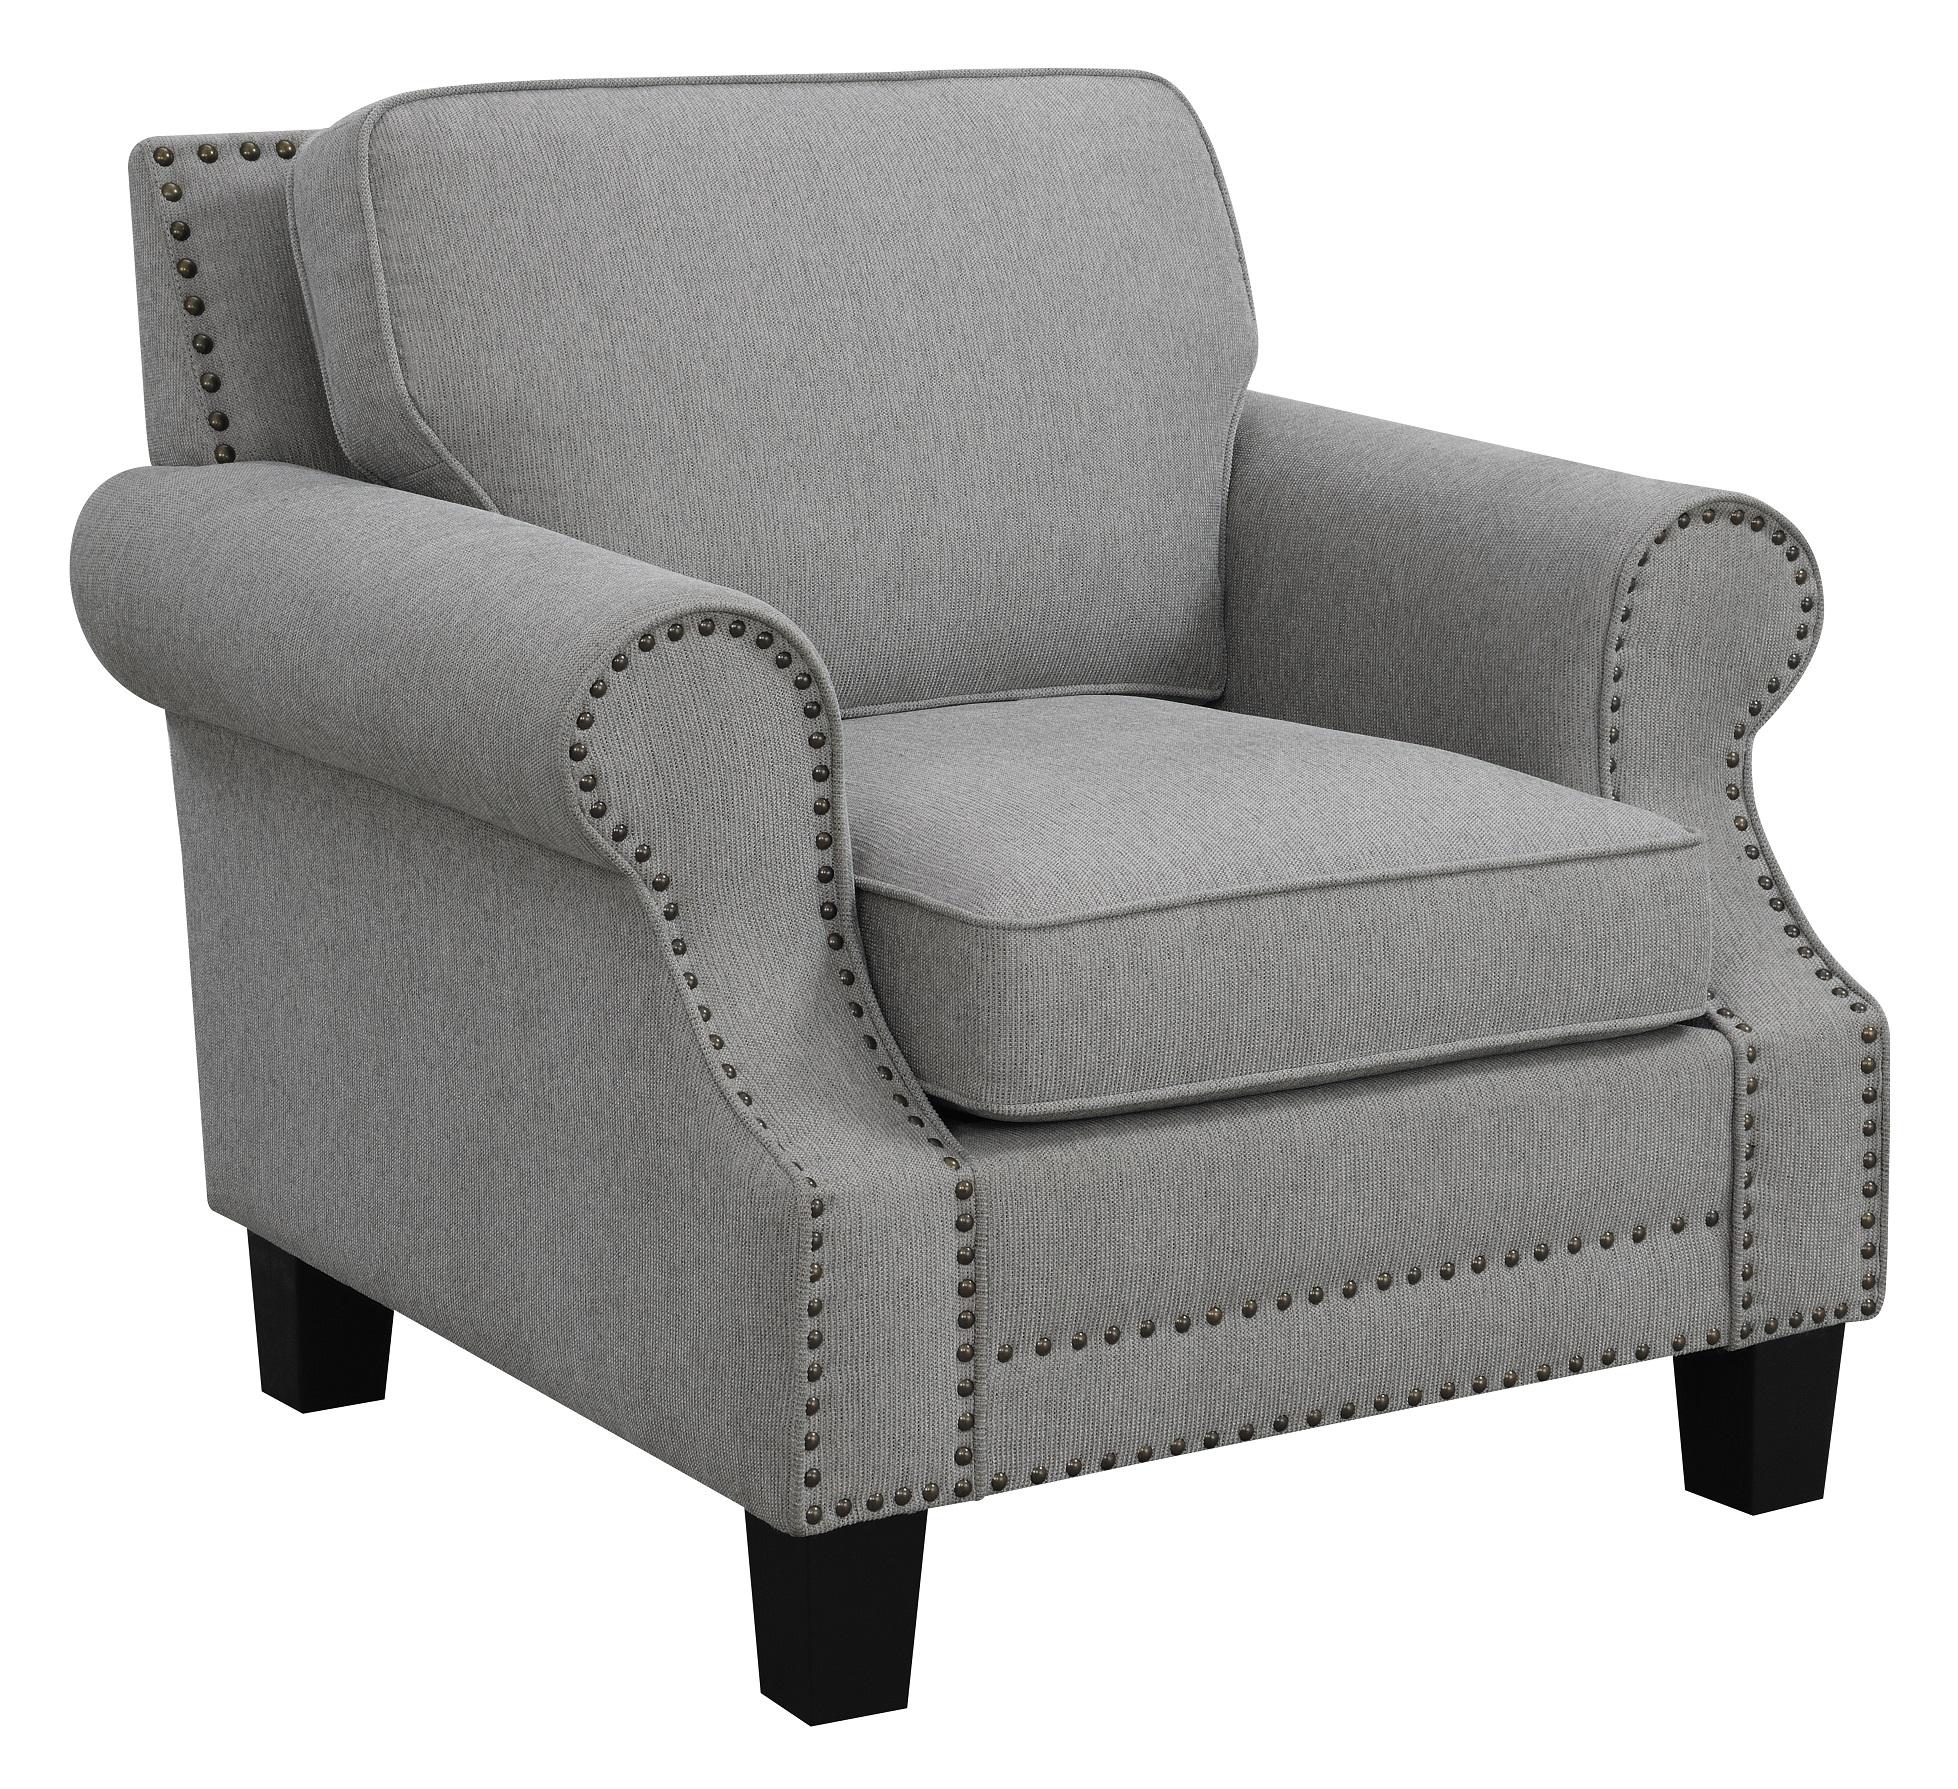 

    
Transitional Gray Woven Fabric Upholstery Arm Chair Coaster 506873 Sheldon
